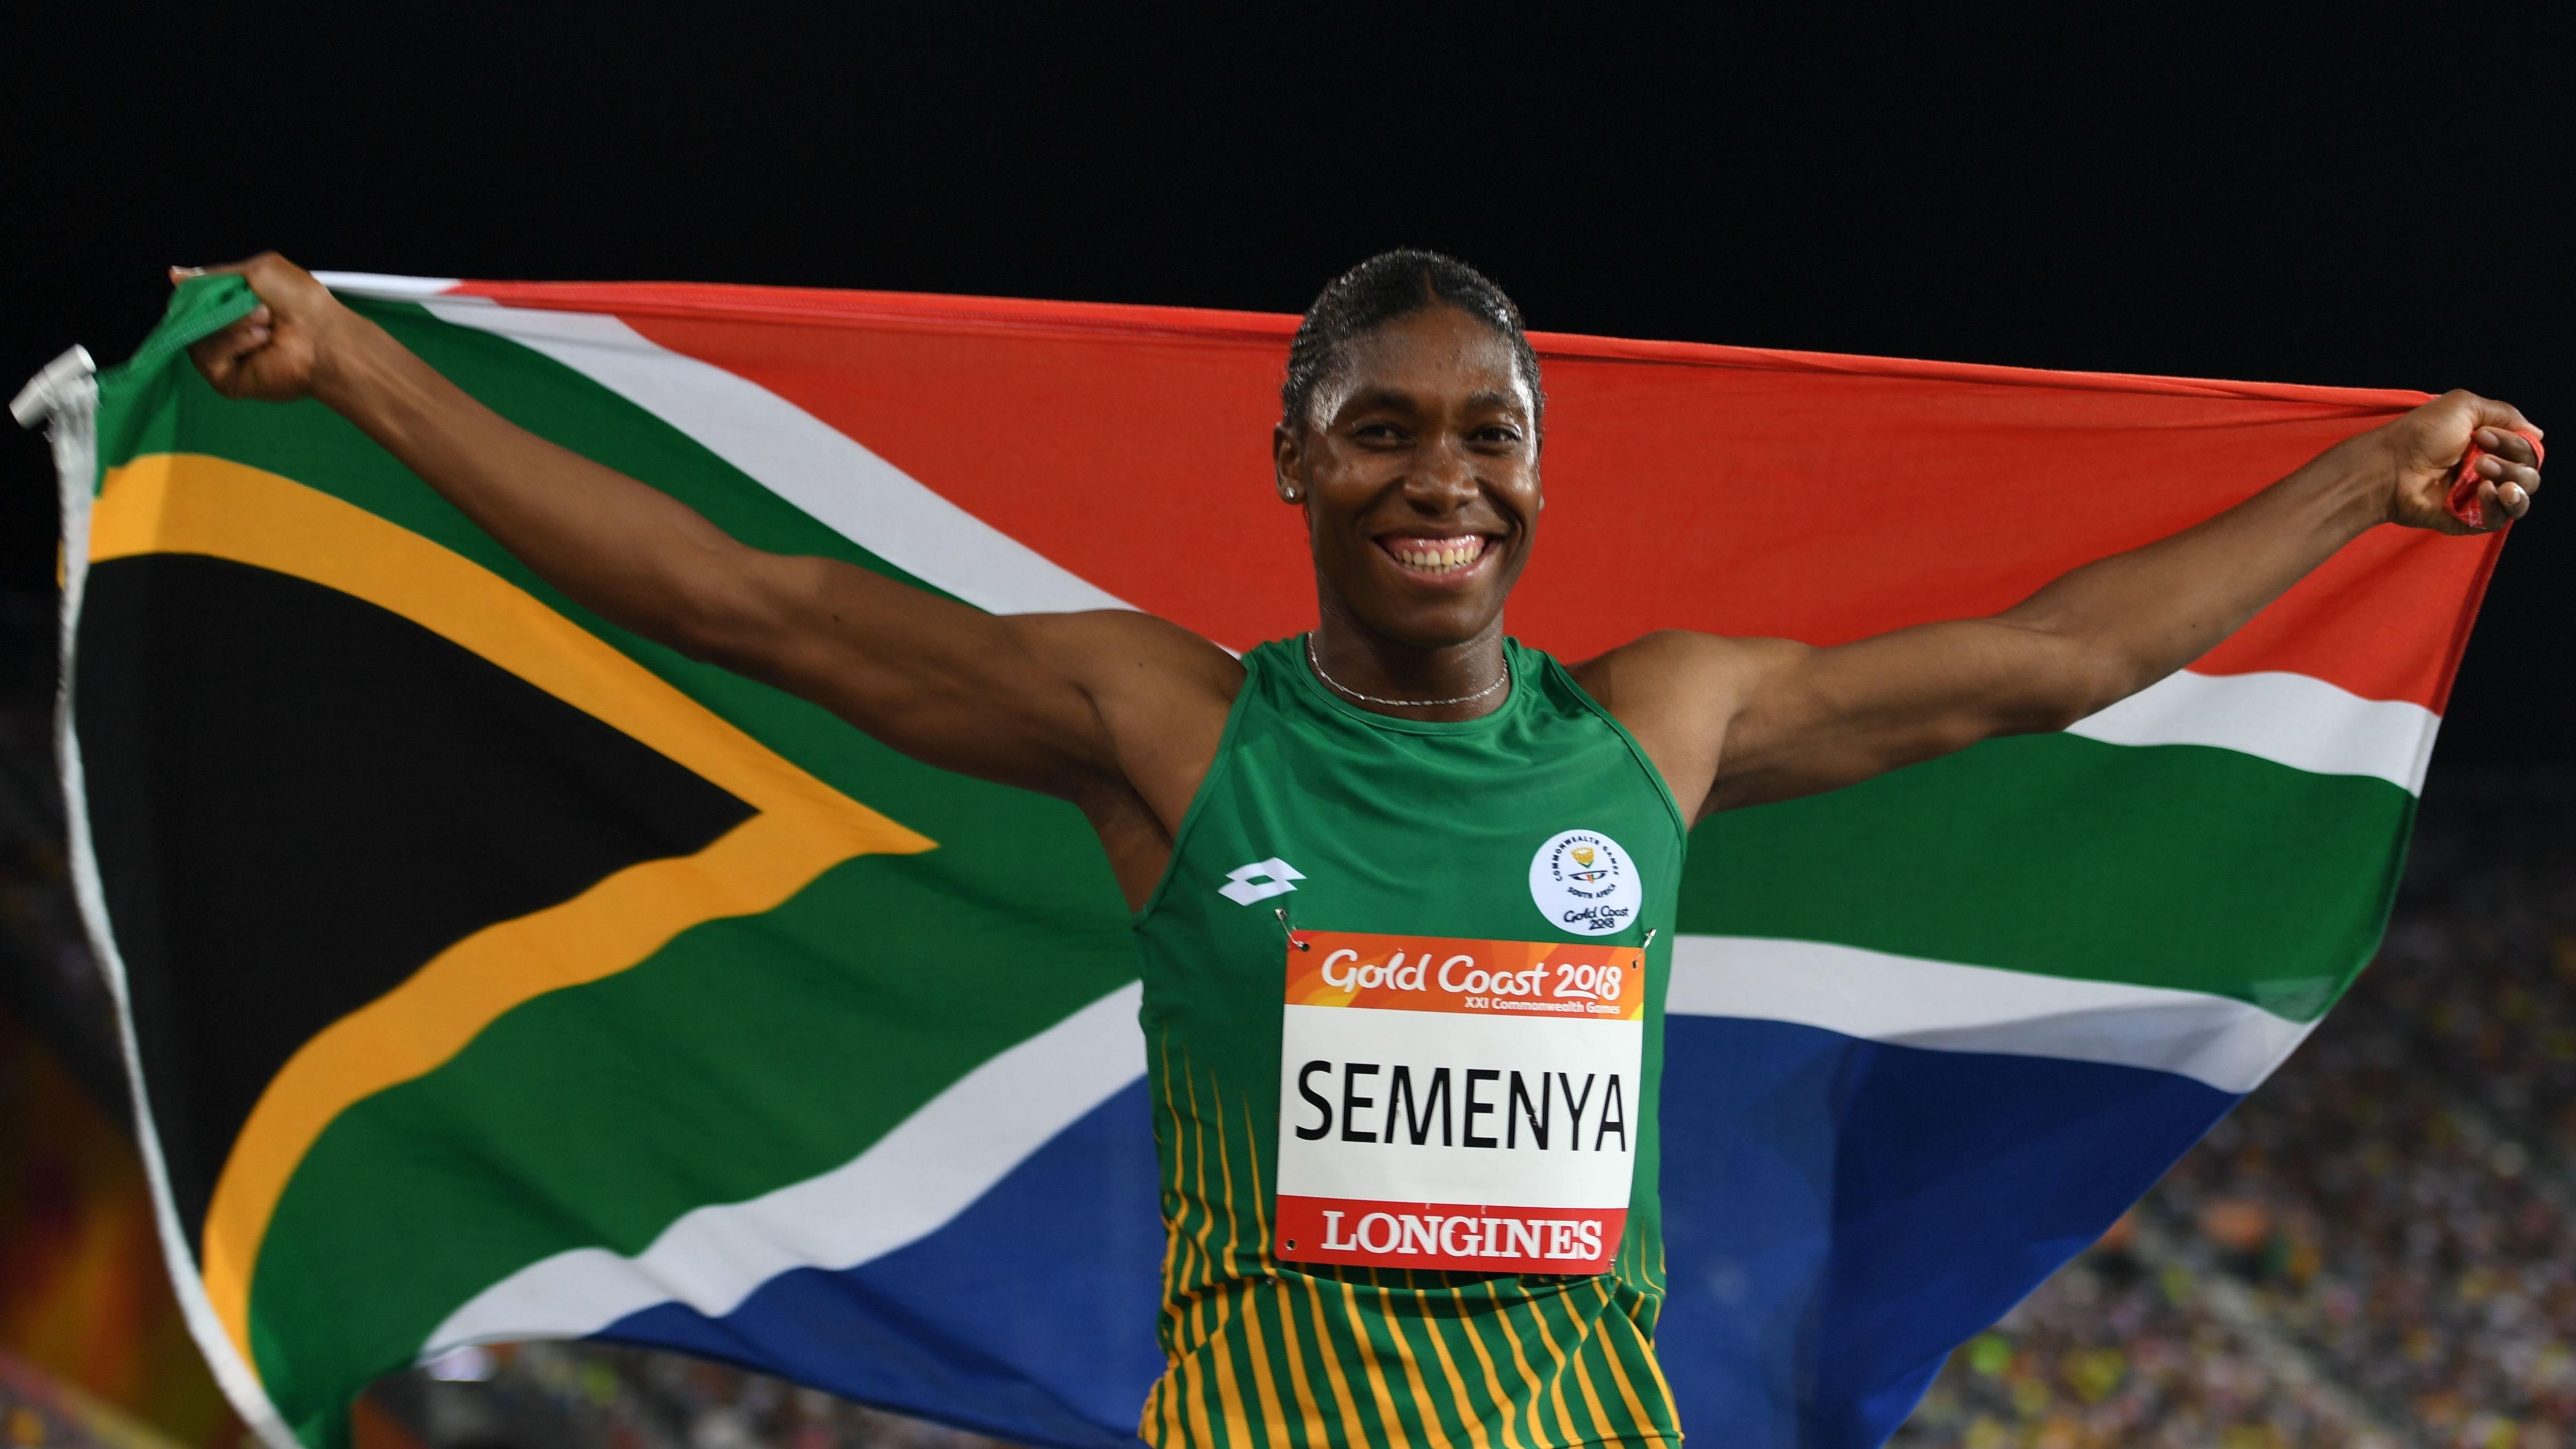 Caster Semenya celebrates with a flag after winning the 800m final during the 2018 Commonwealth Games.